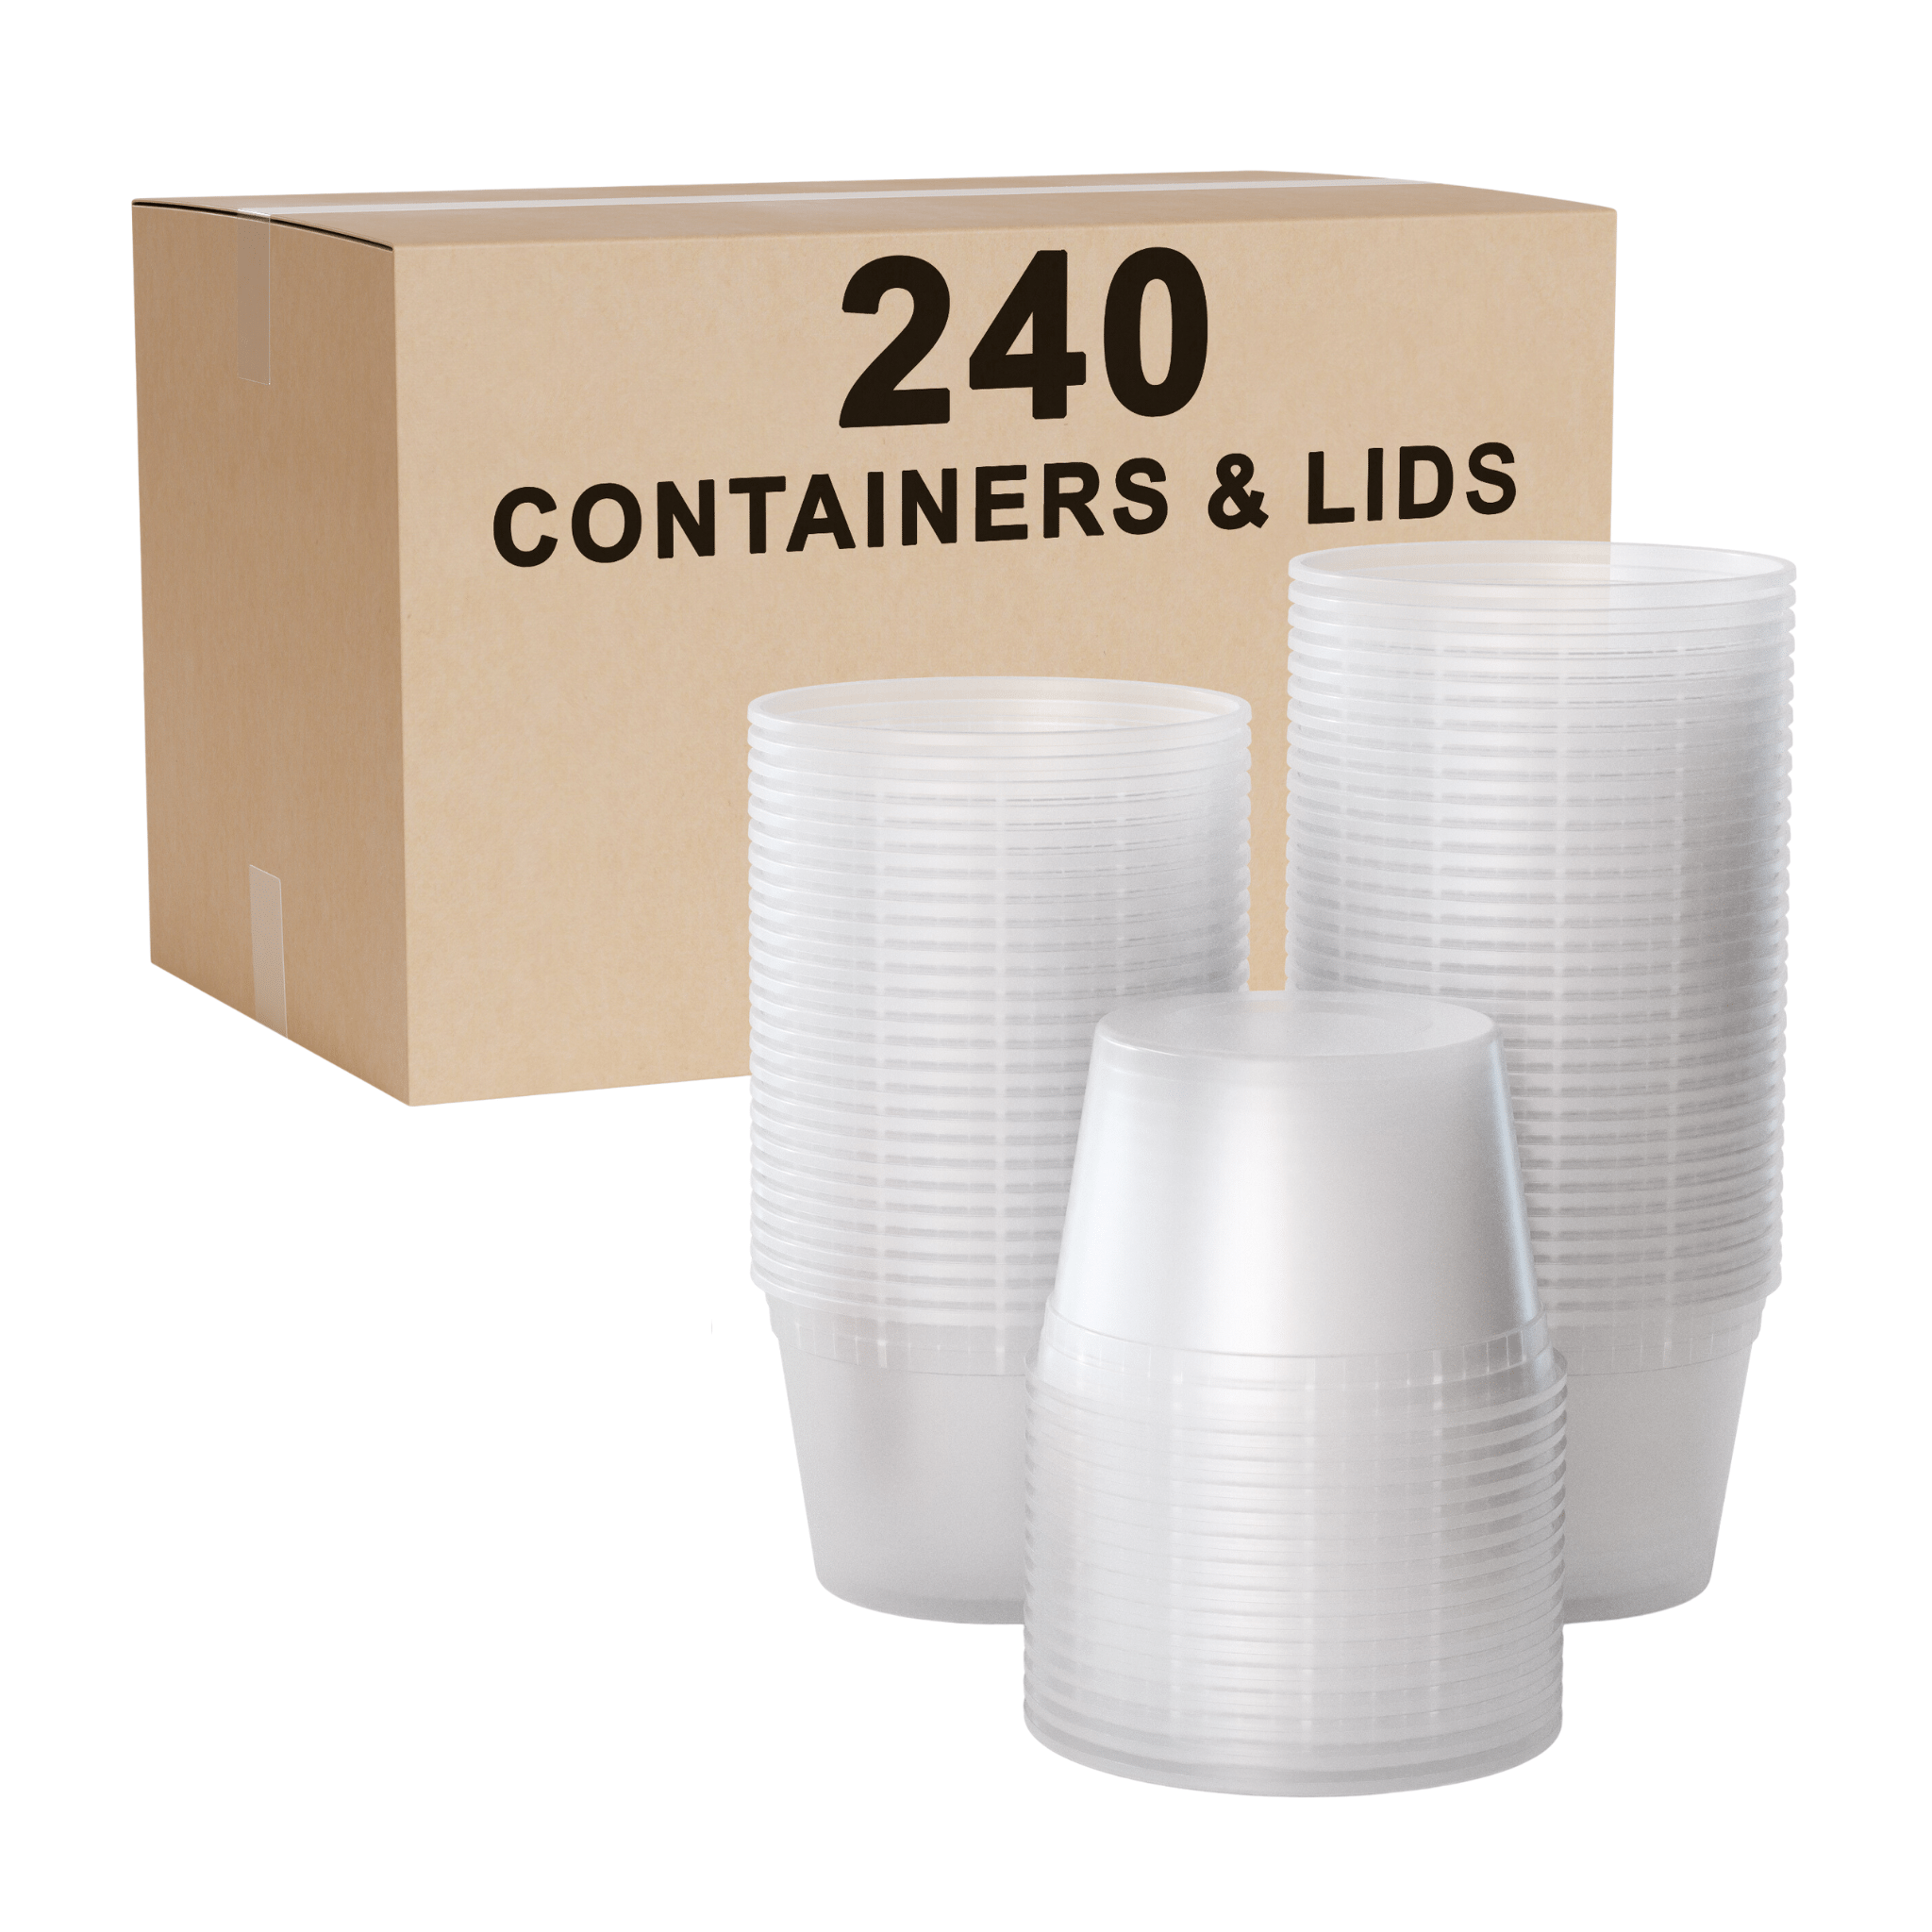 16 Oz. Deli Containers with Lids | 240 Pack